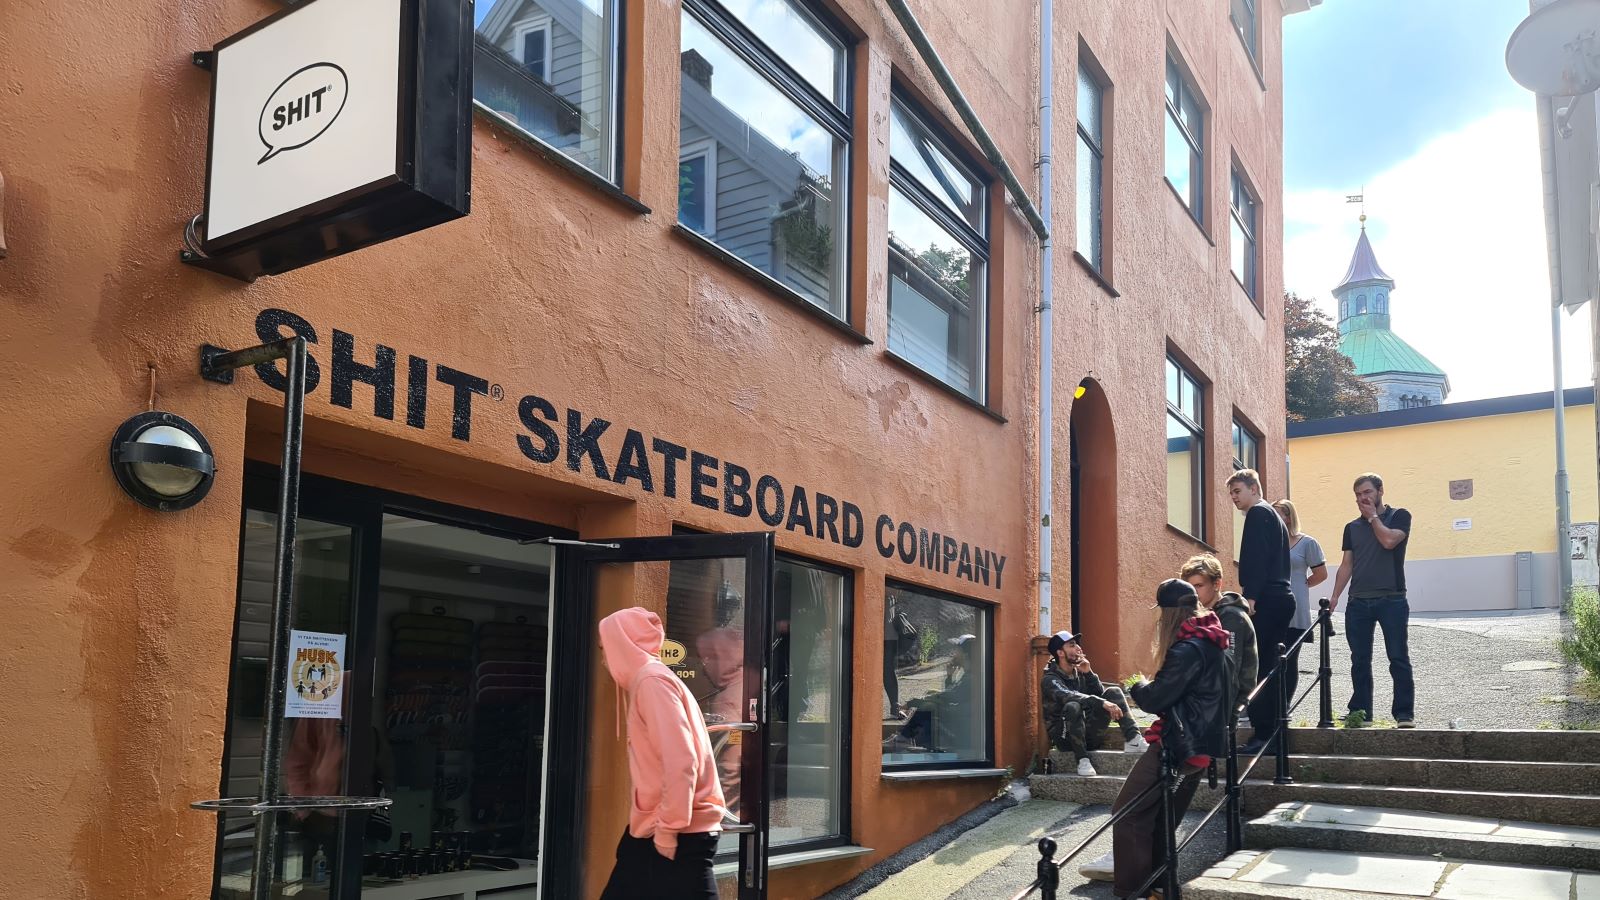 Shit Skate Shop front, Norway